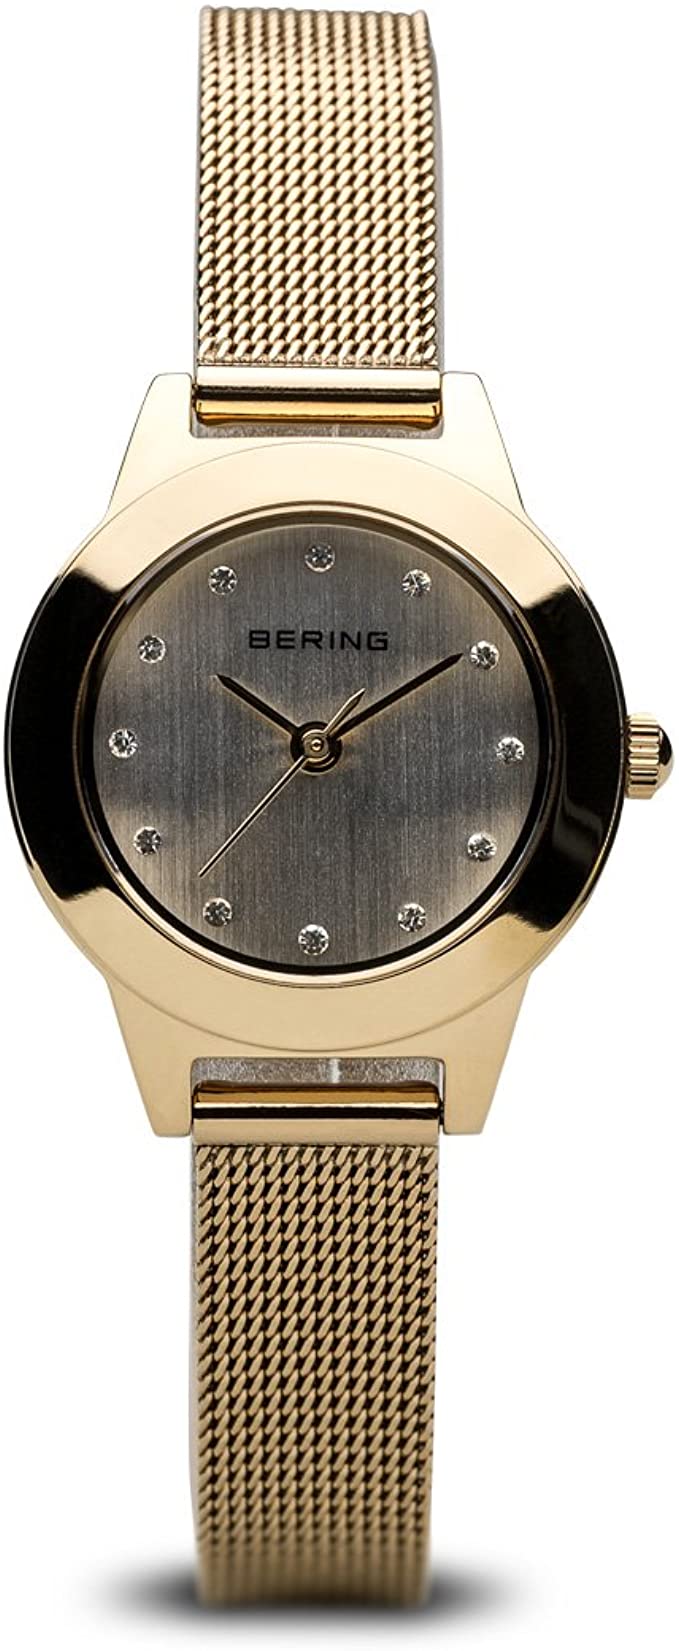 BERING Time | Women's Slim Watch 11125-334 | 25MM Case | Classic Collection | Stainless Steel Strap | Scratch-Resistant Sapphire Crystal | Minimalistic - Designed in Denmark